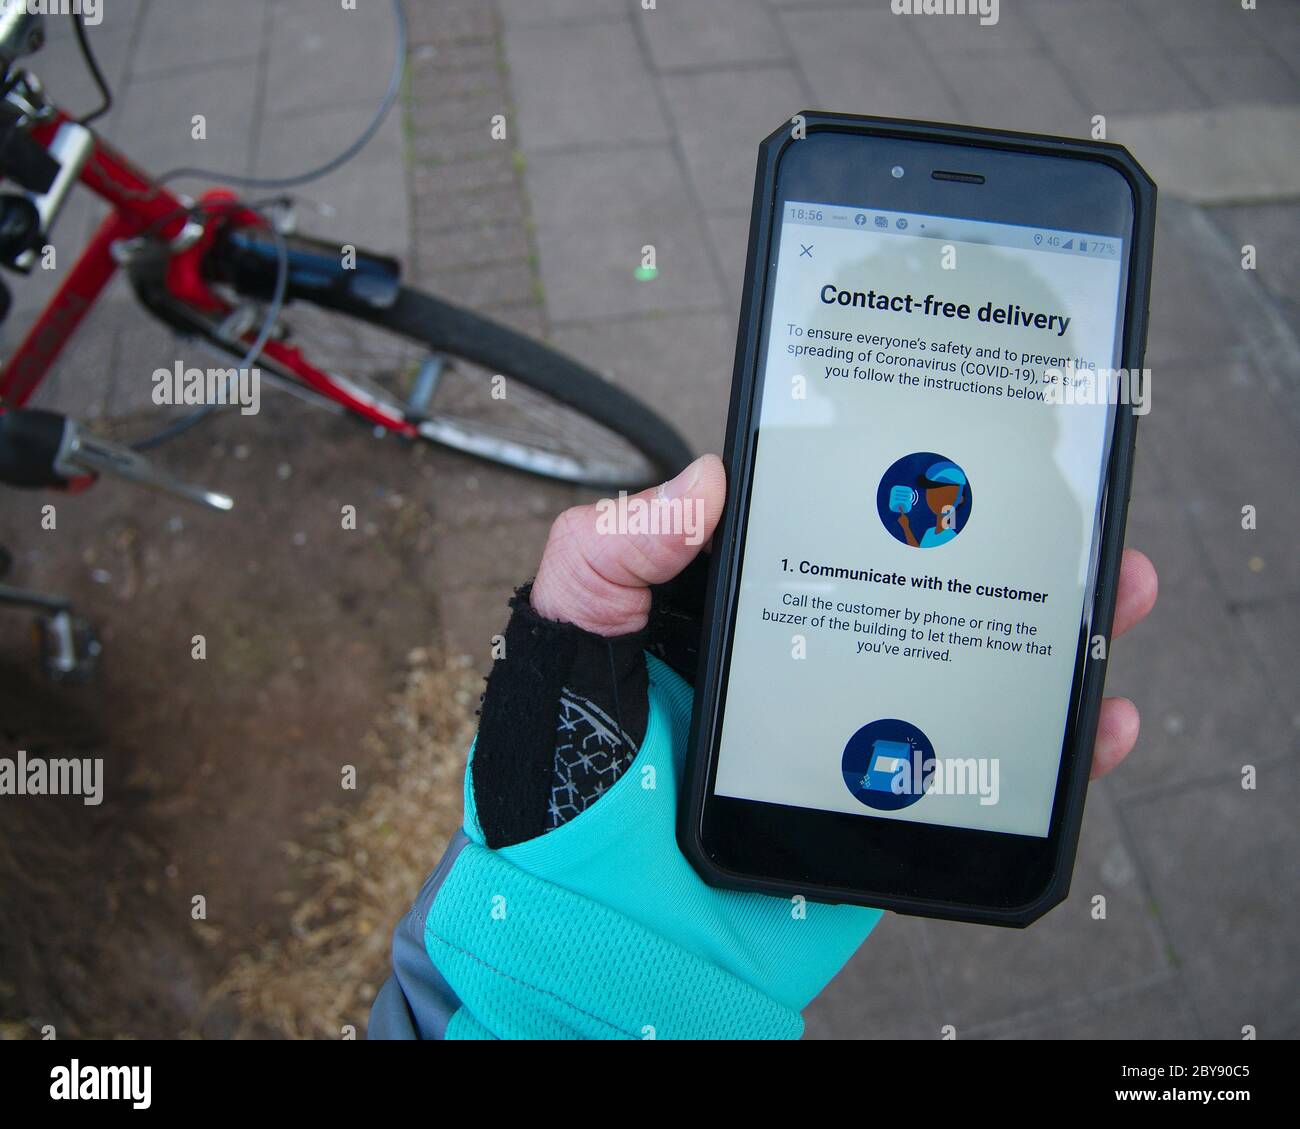 Deliveroo Cycle courier food delivery rider checks contactless delivery guidance on phone app. Stock Photo